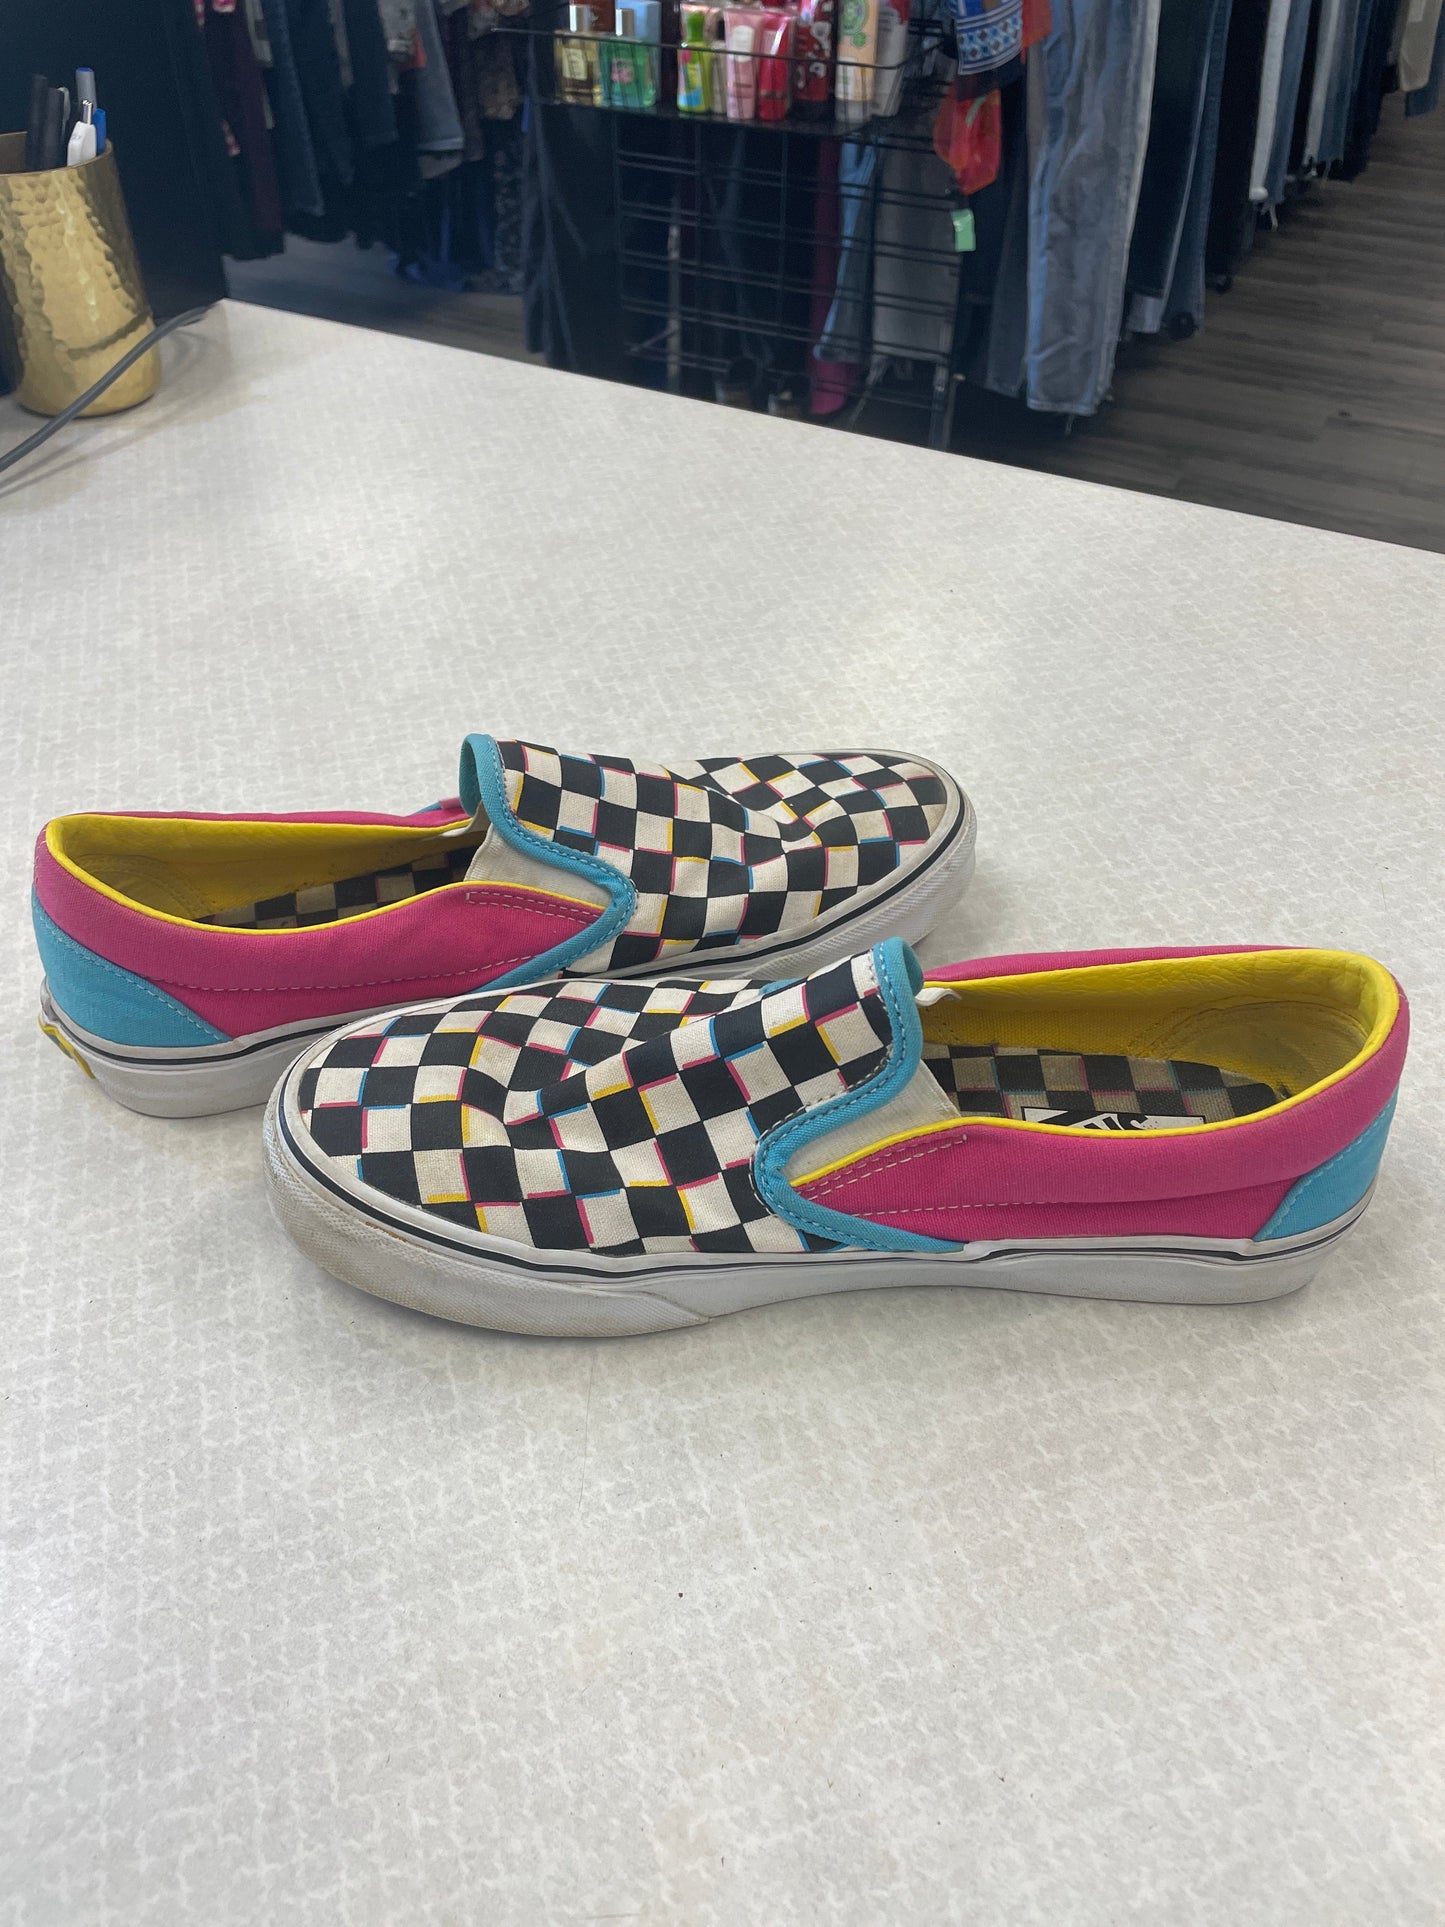 Checkered Pattern Shoes Flats Vans, Size 9.5